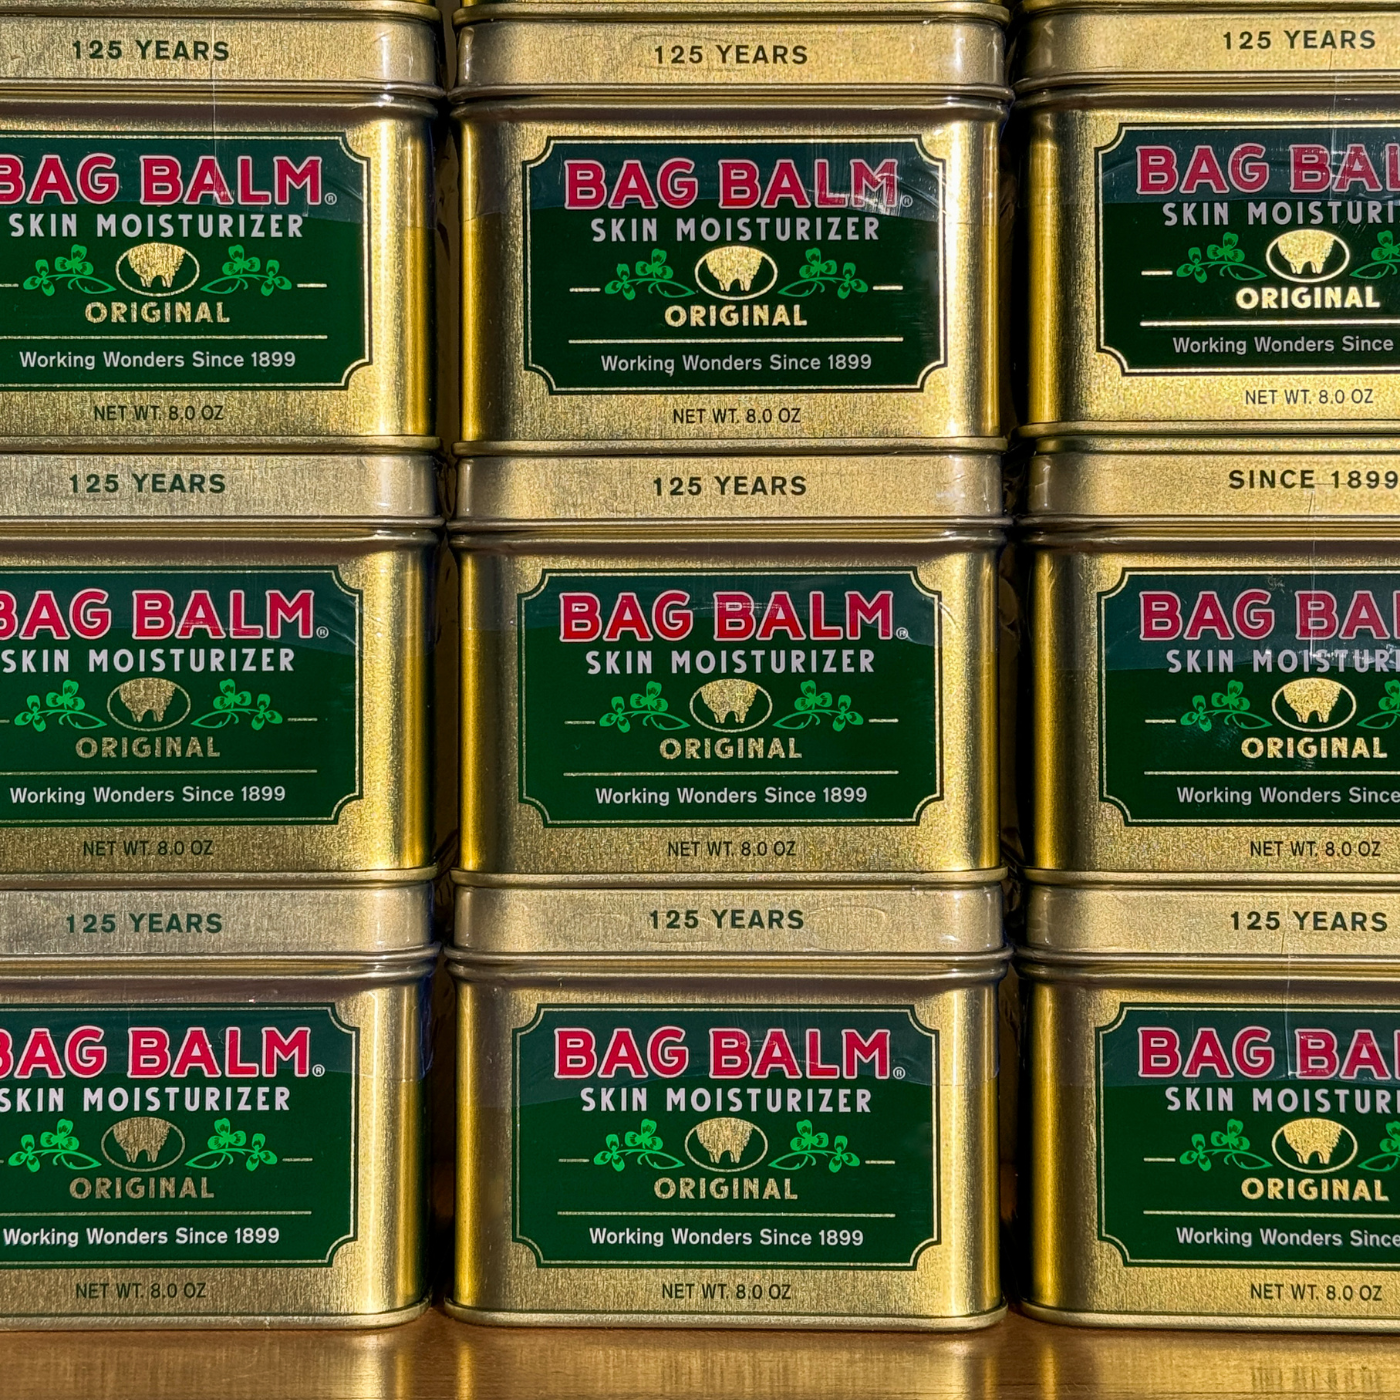 Stacked gold tins of Bag Balm